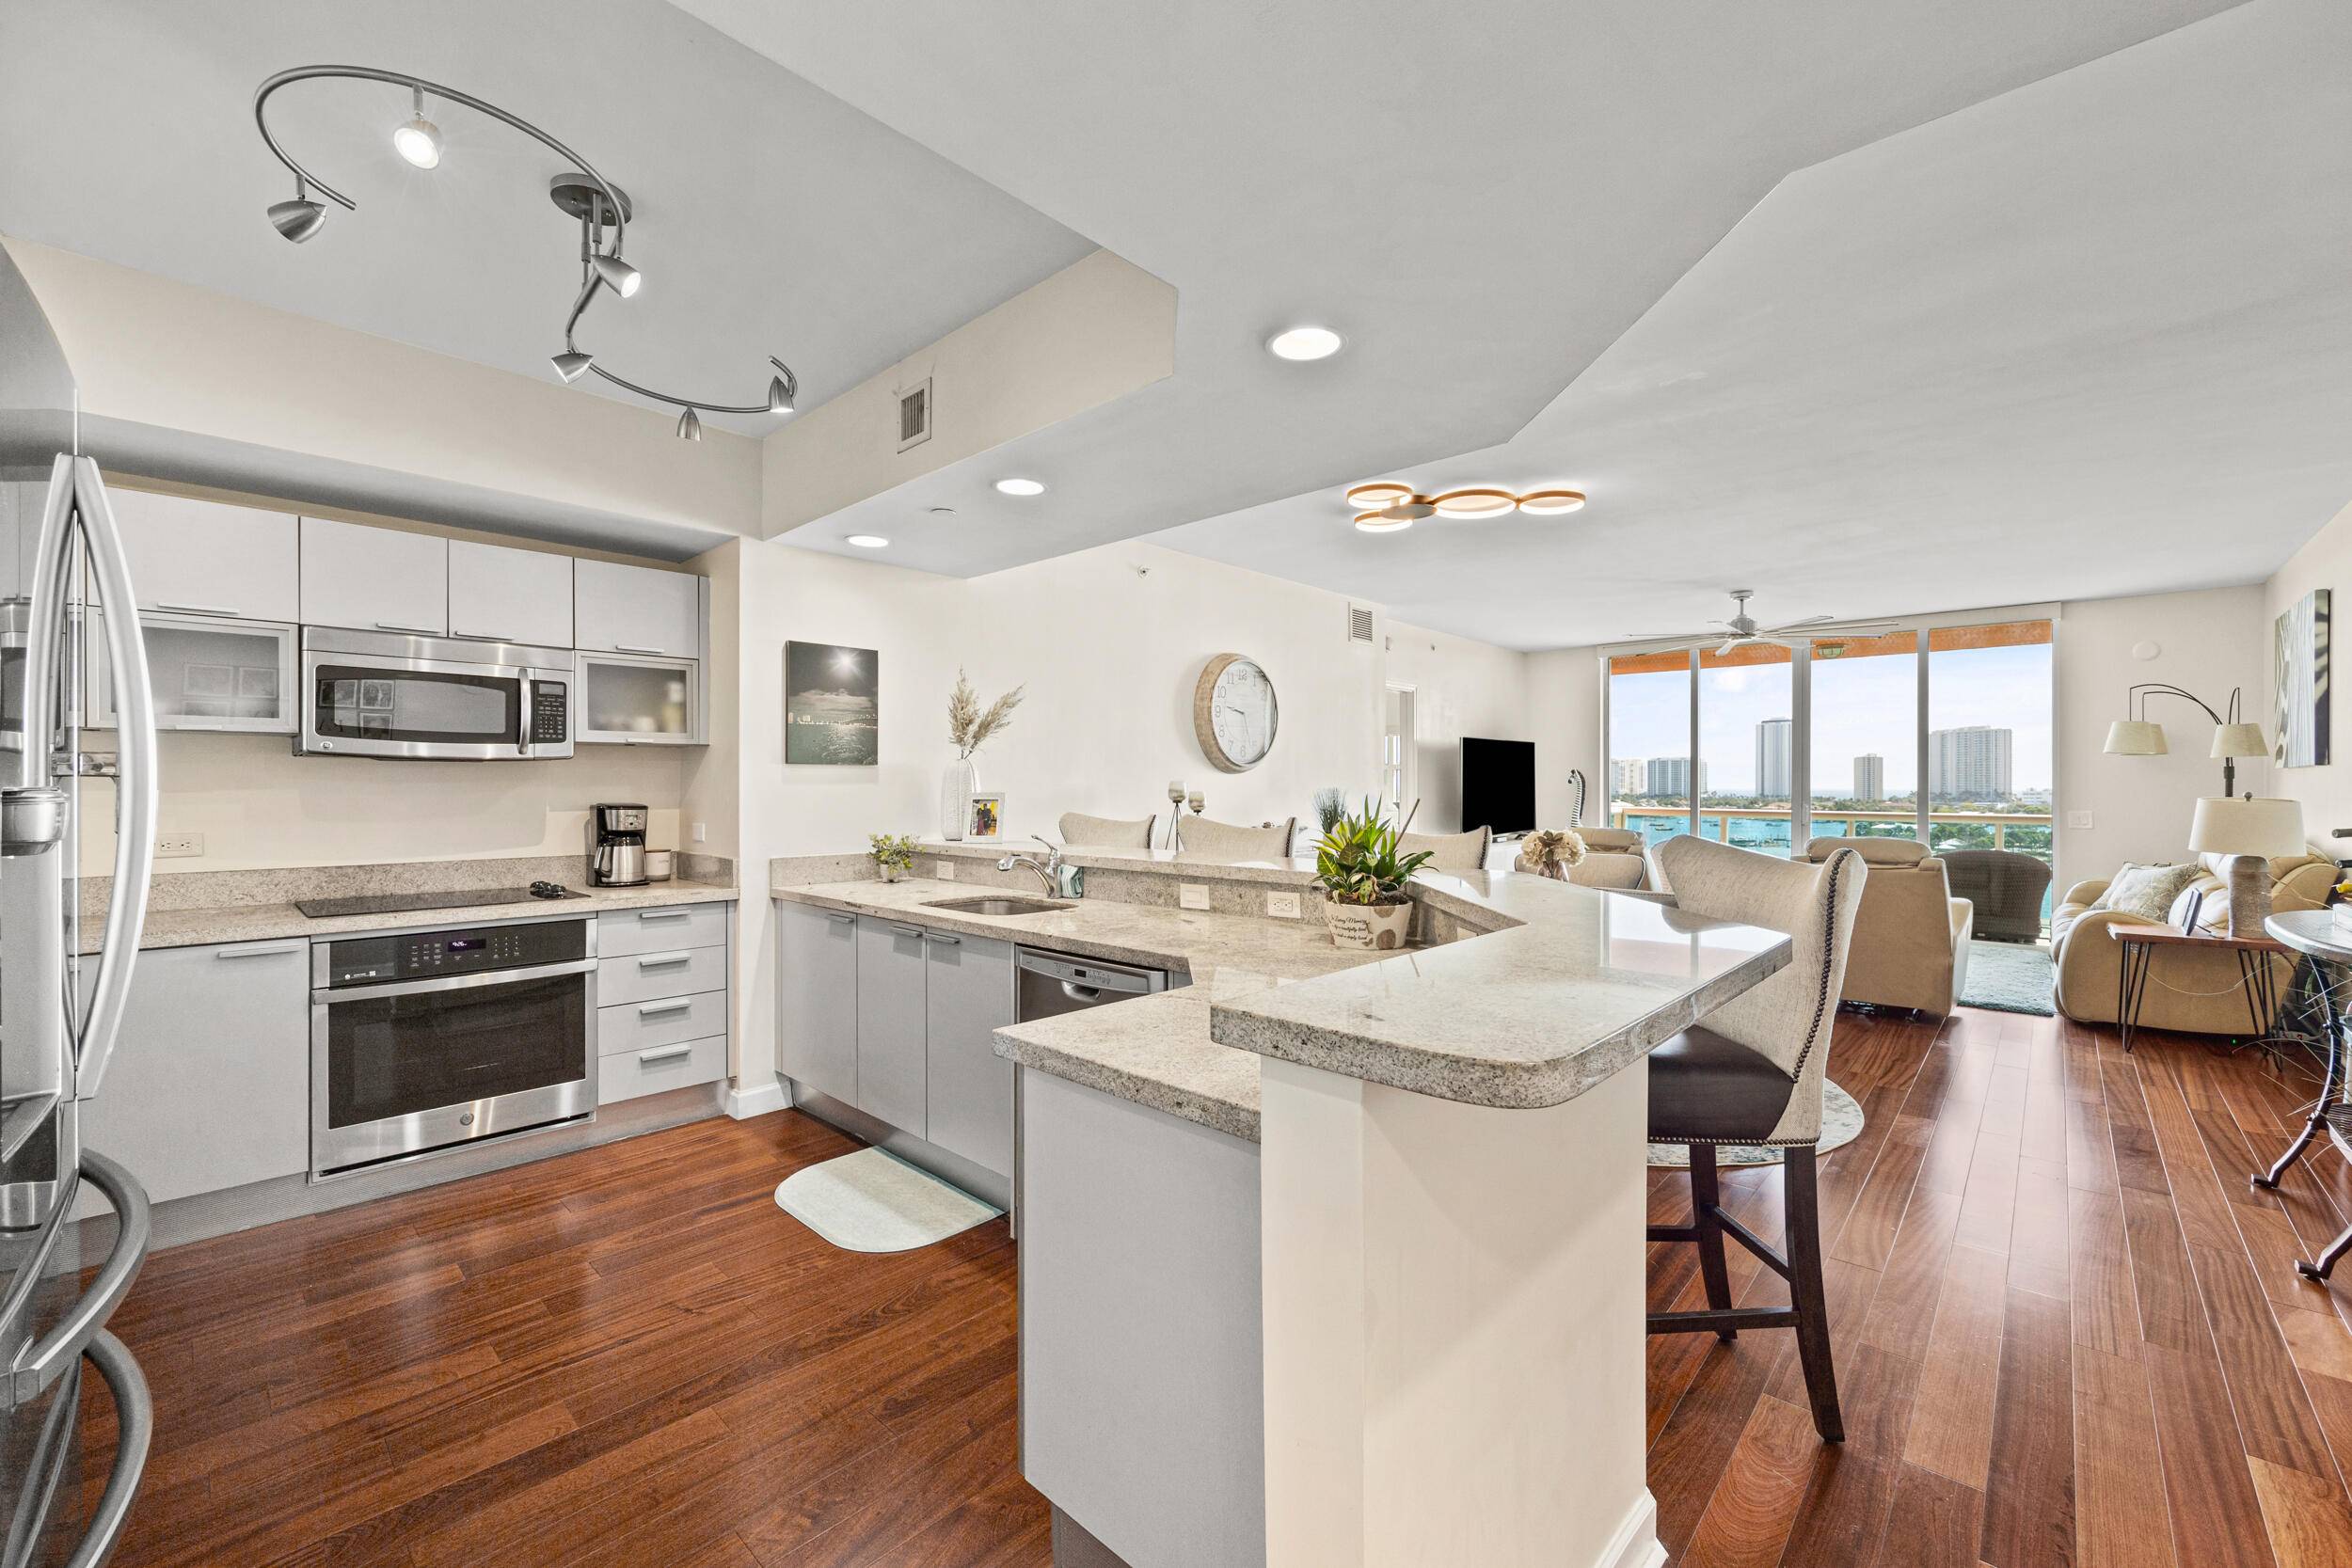 Welcome to Marina Grande 908, a model perfect home offering sweeping views of the Intracoastal Waterway, the Atlantic Ocean and all of Singer Island !